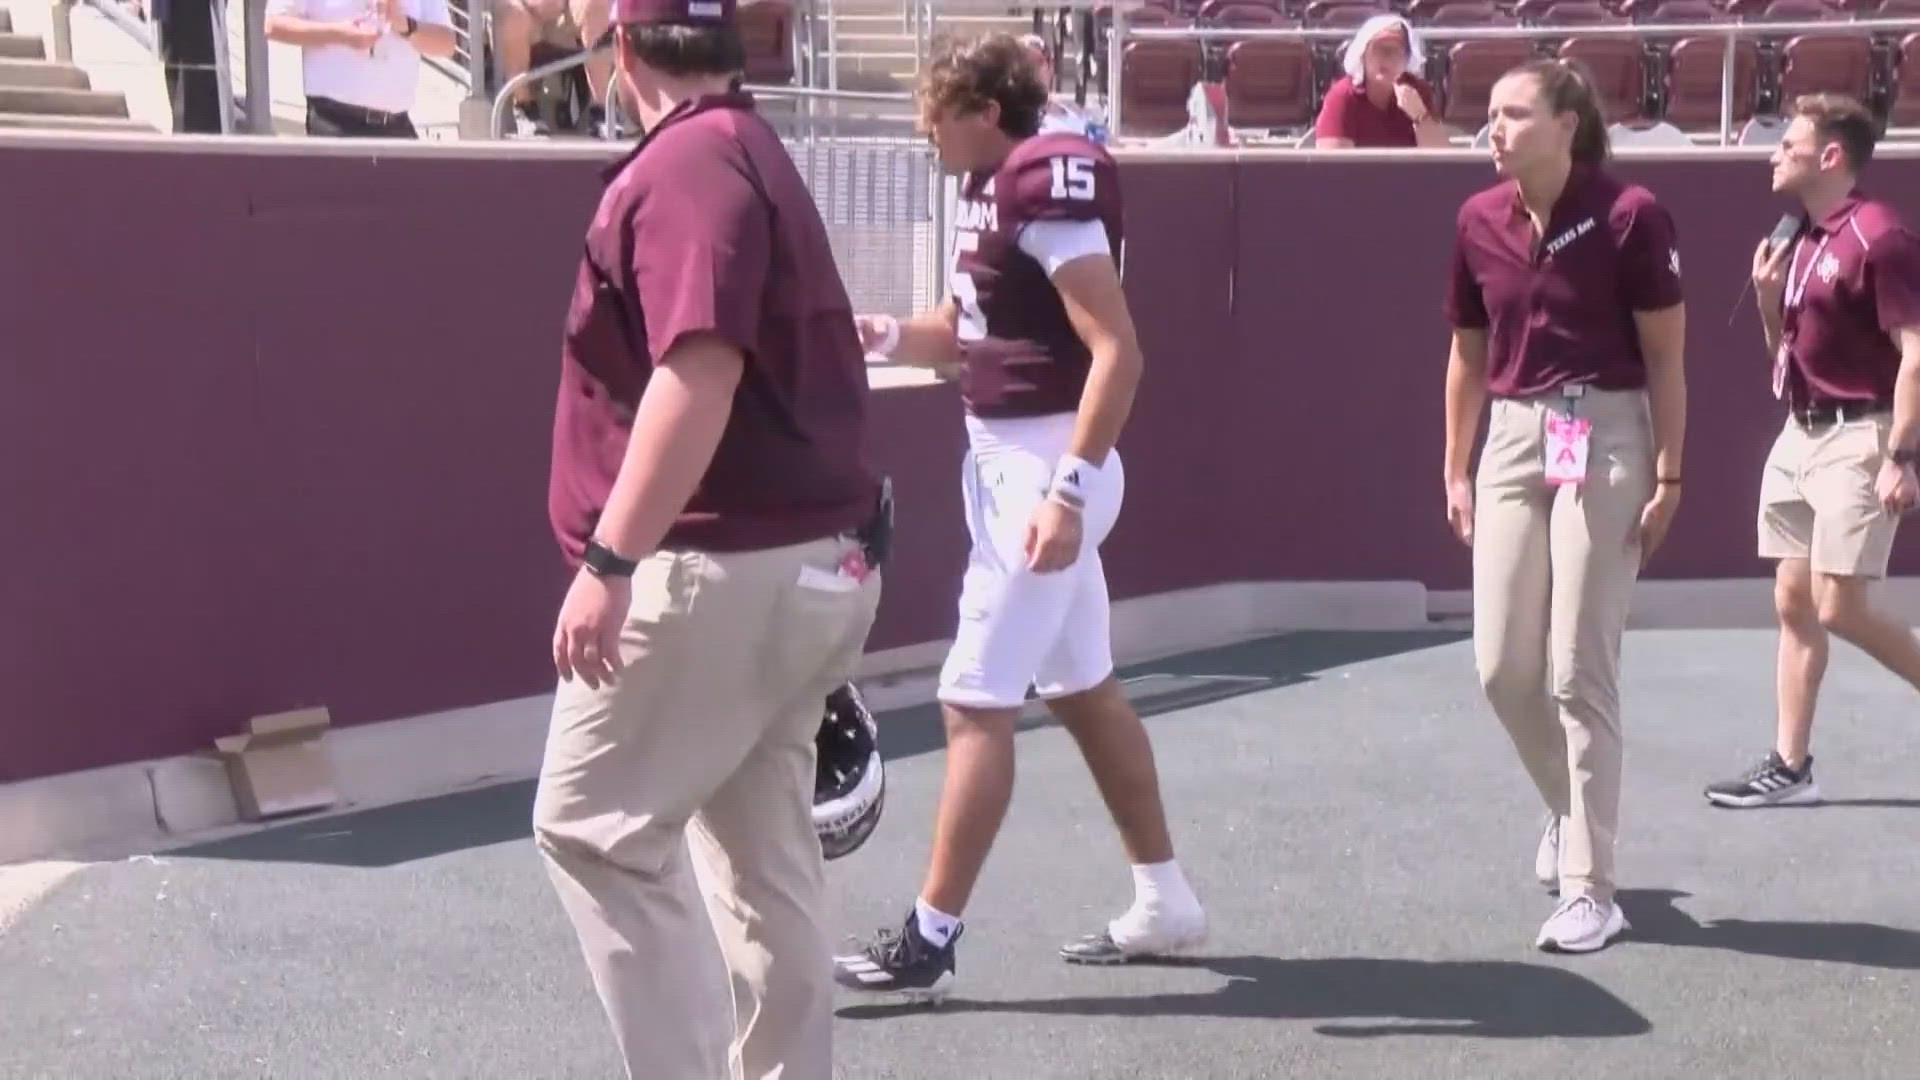 Weigman's sophomore year ended early on during SEC play after breaking his foot.